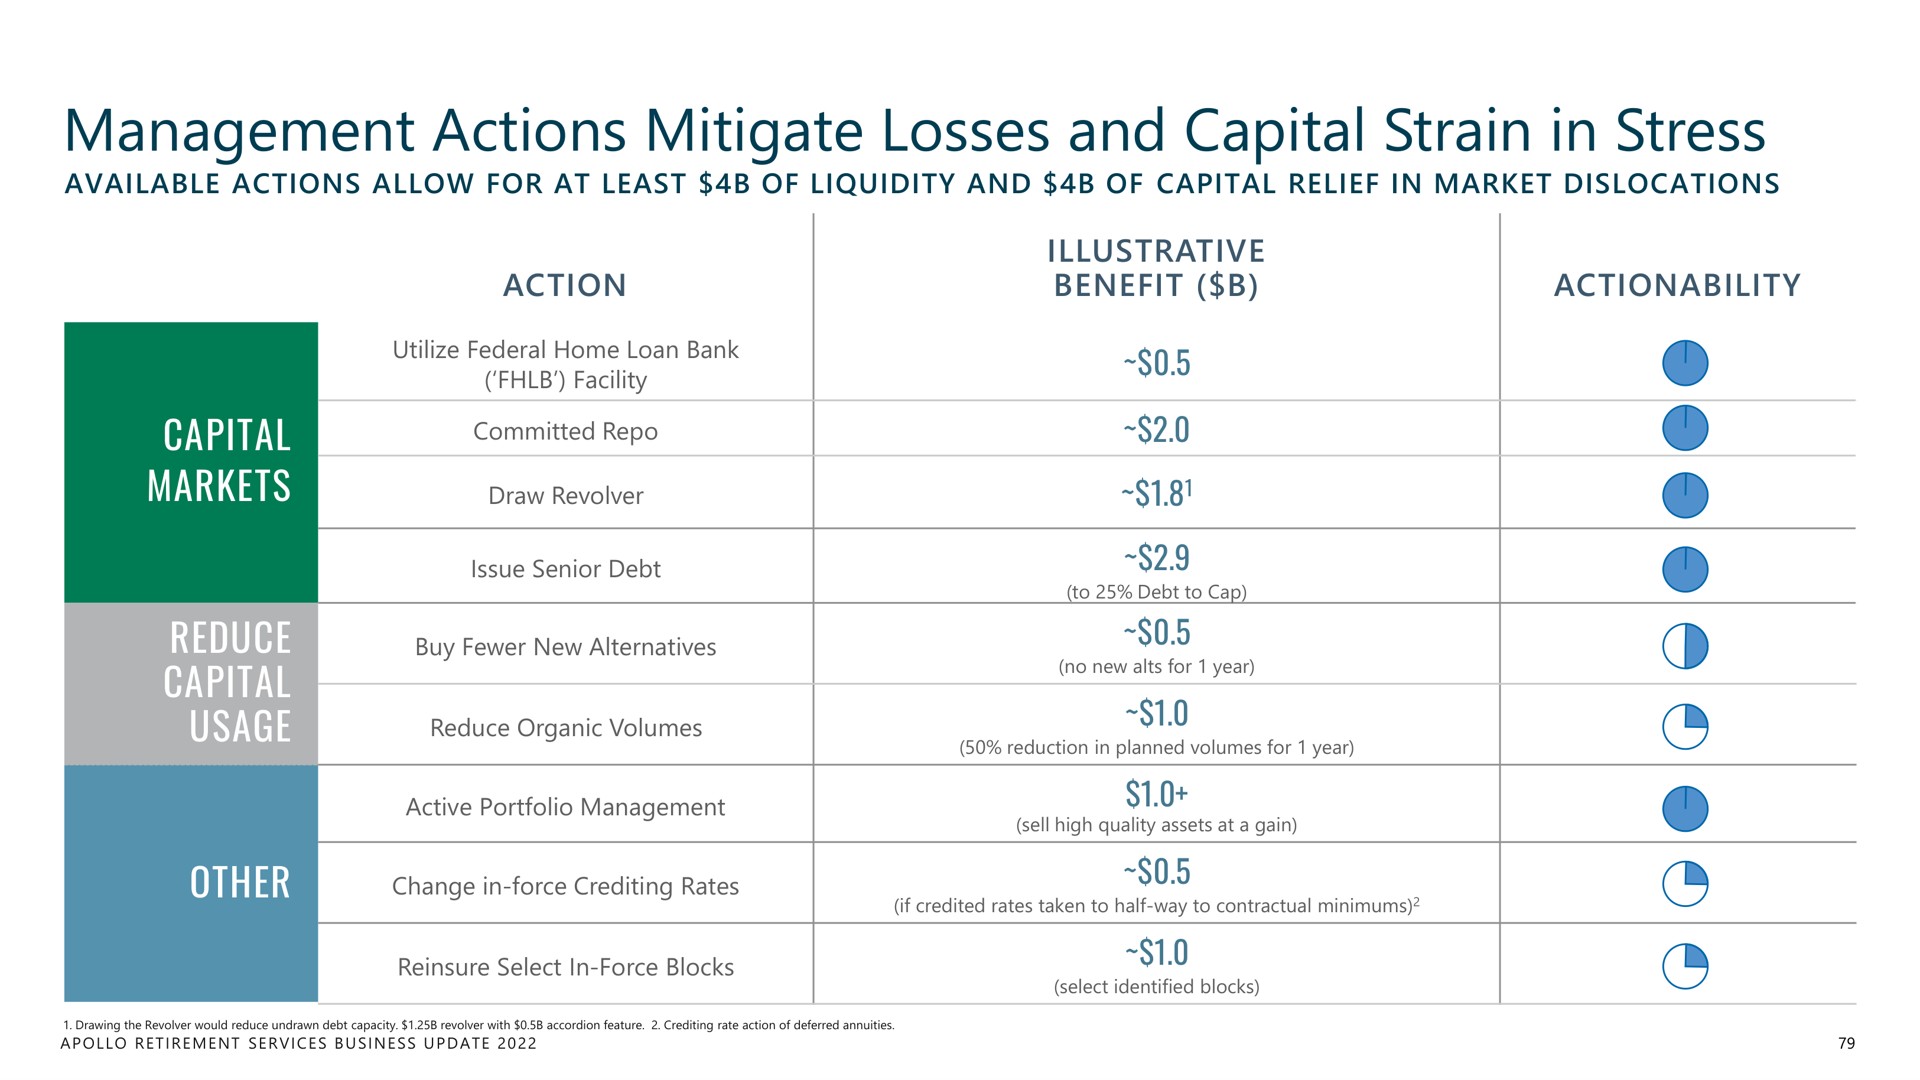 management actions mitigate losses and capital strain in stress | Apollo Global Management